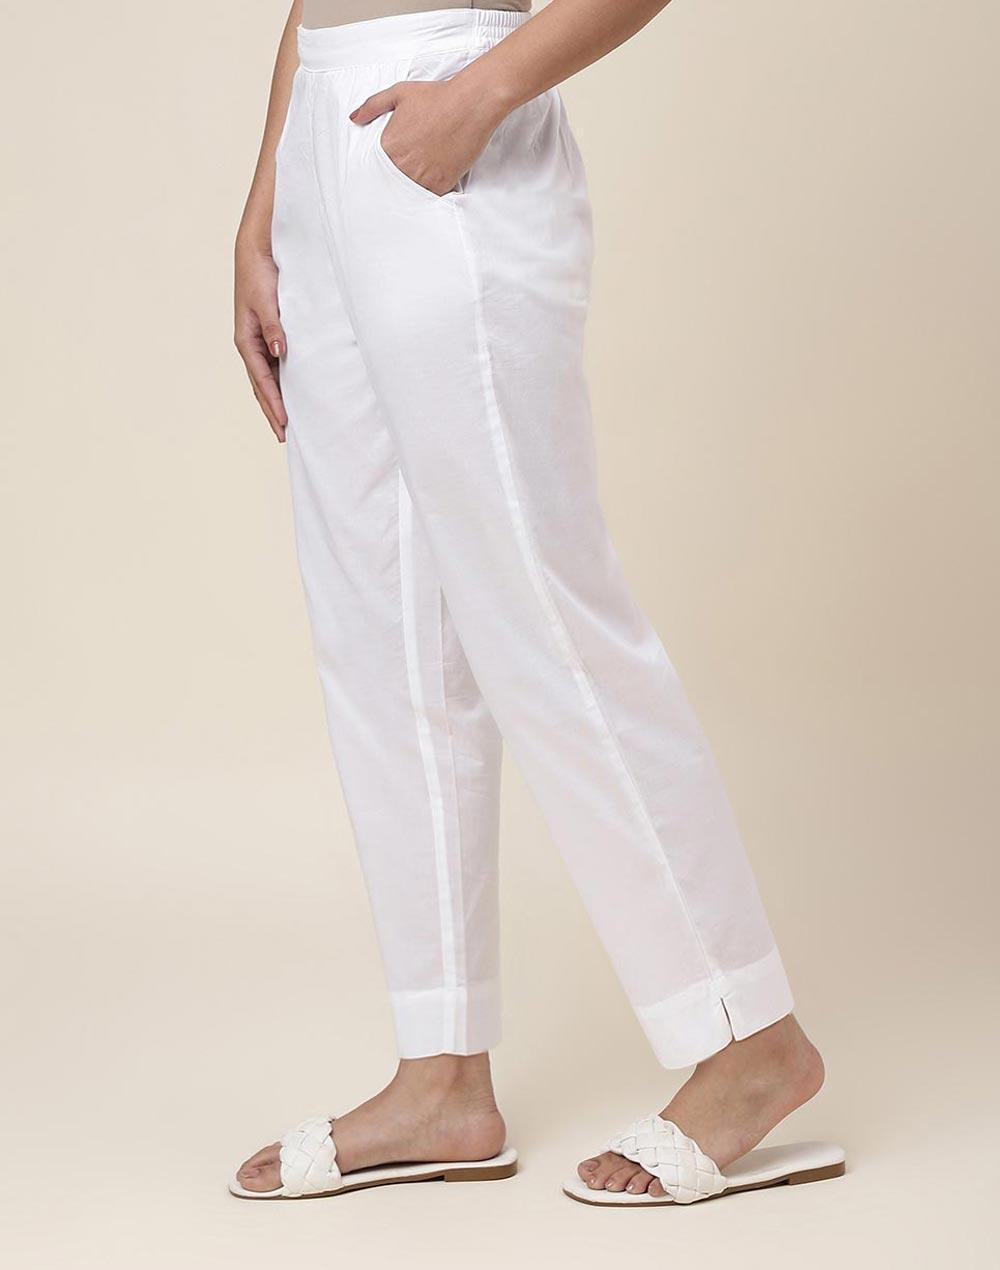 white cotton ankle length casual tapered pant